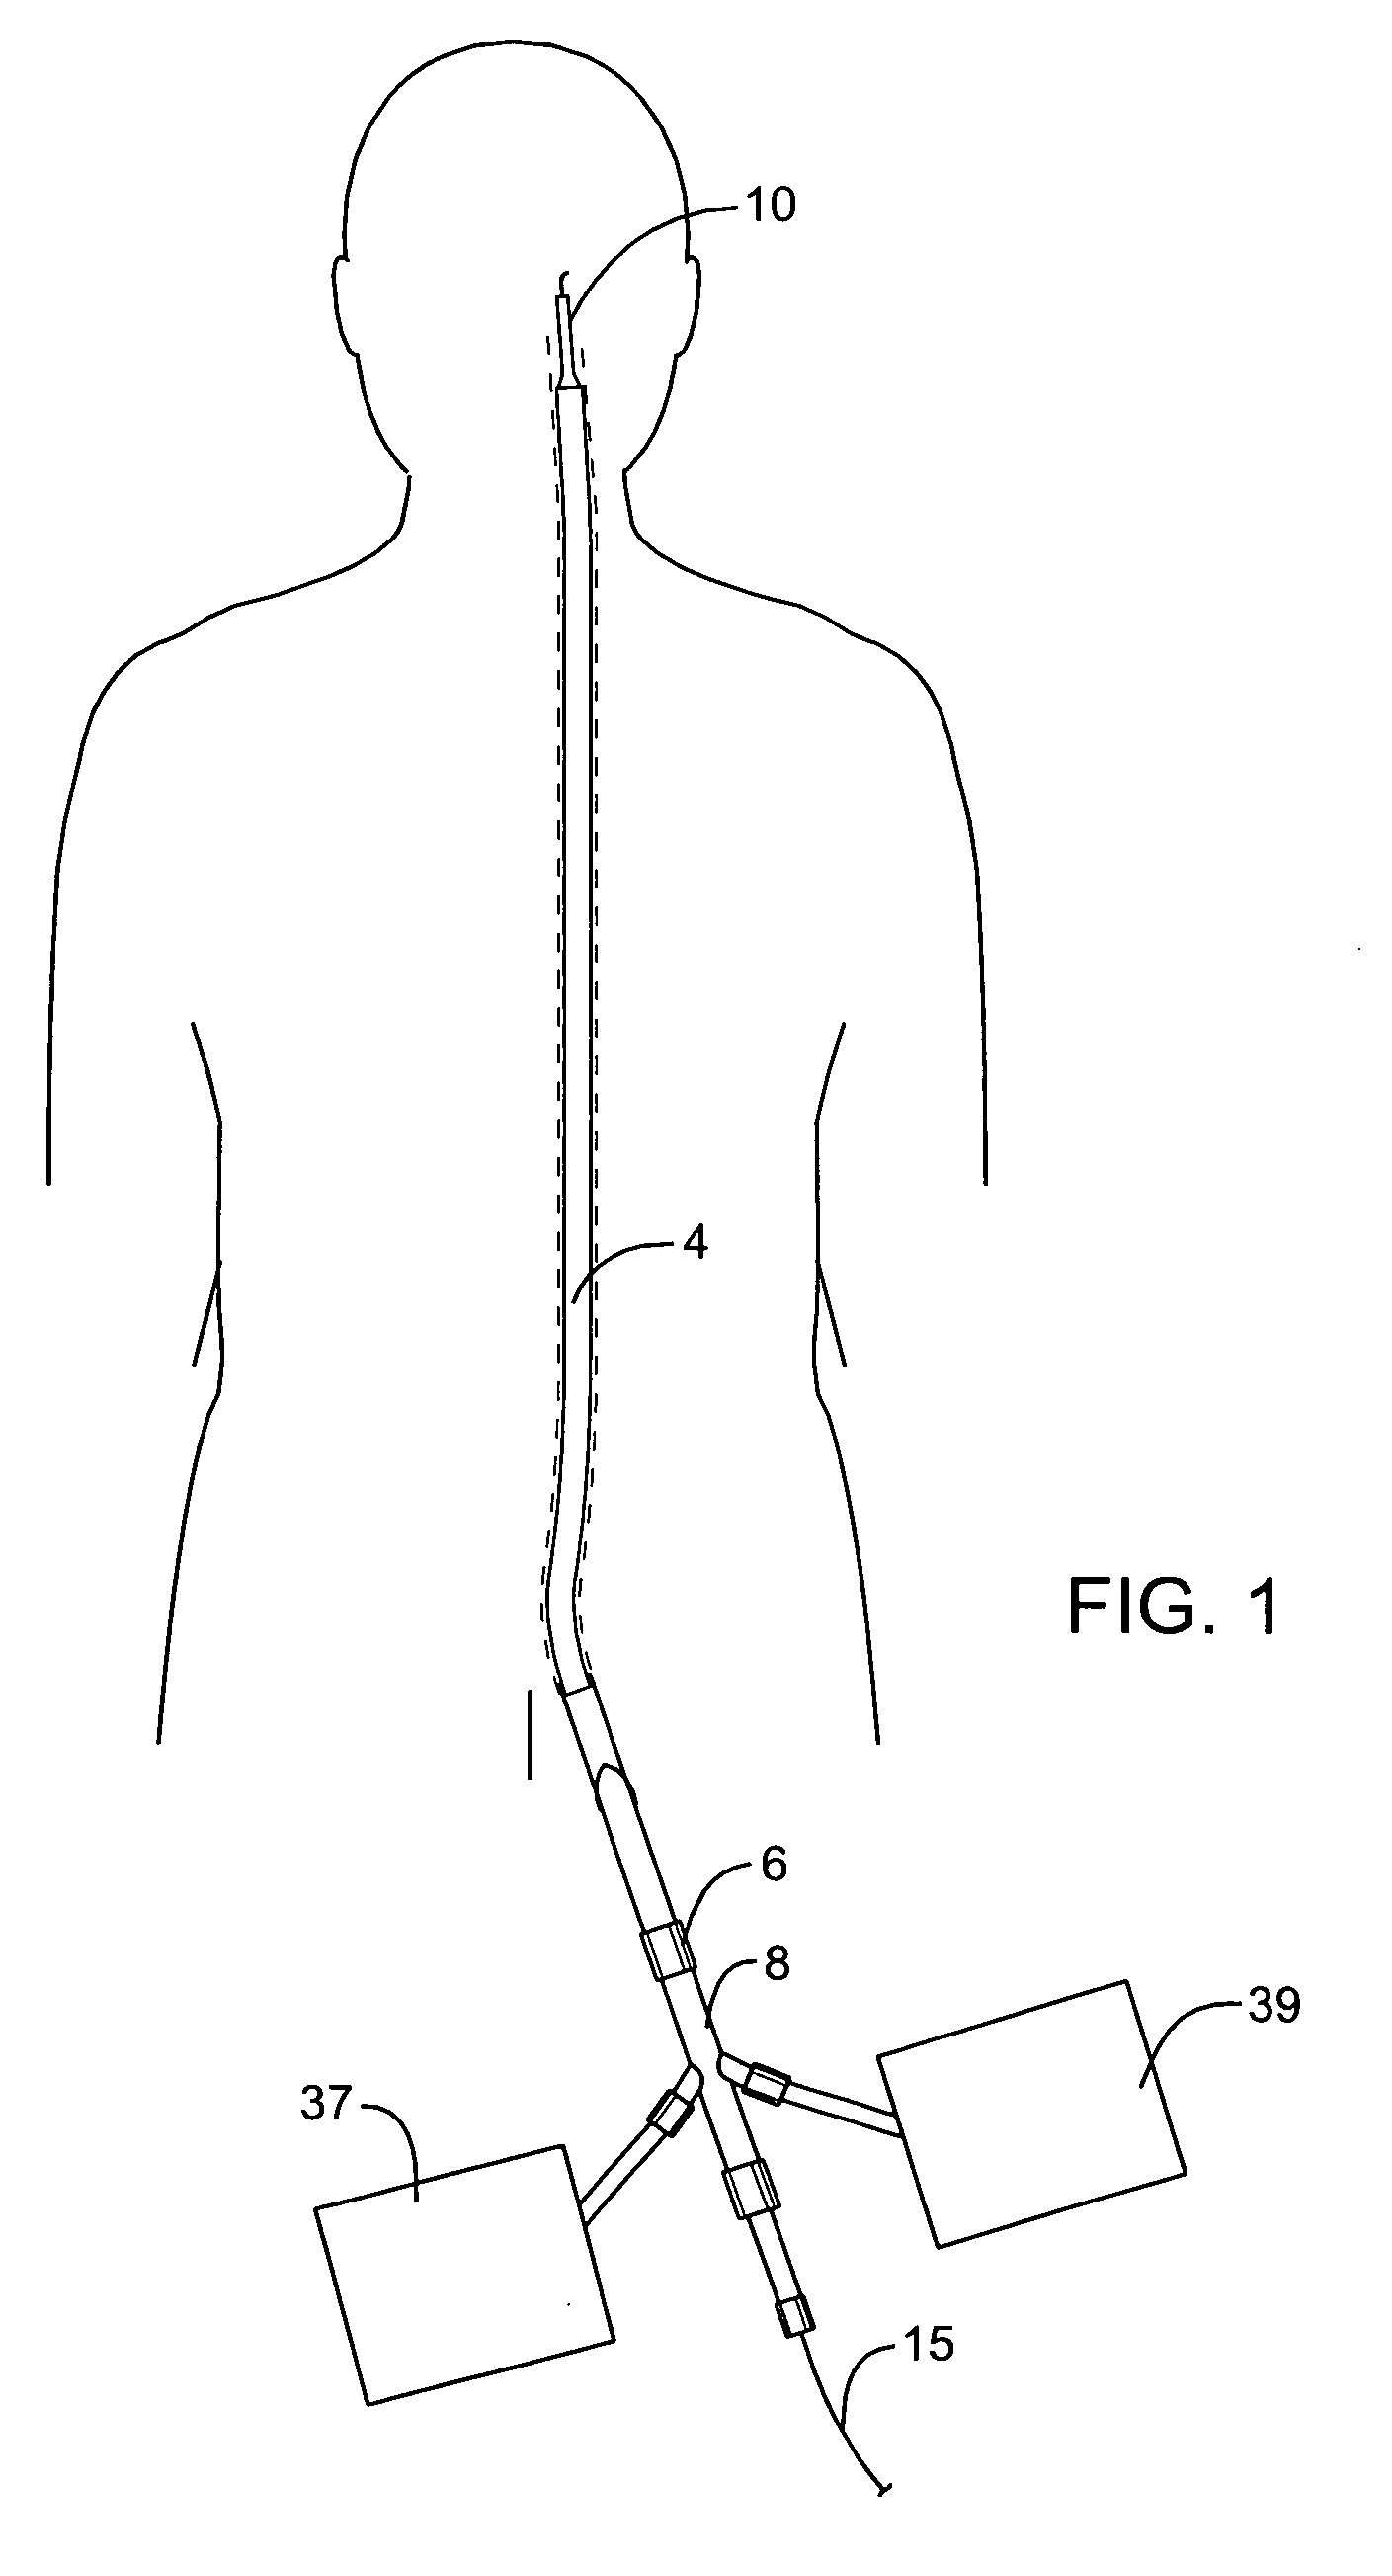 Methods and devices for protecting passageway in a body when advancing devices through the passageway